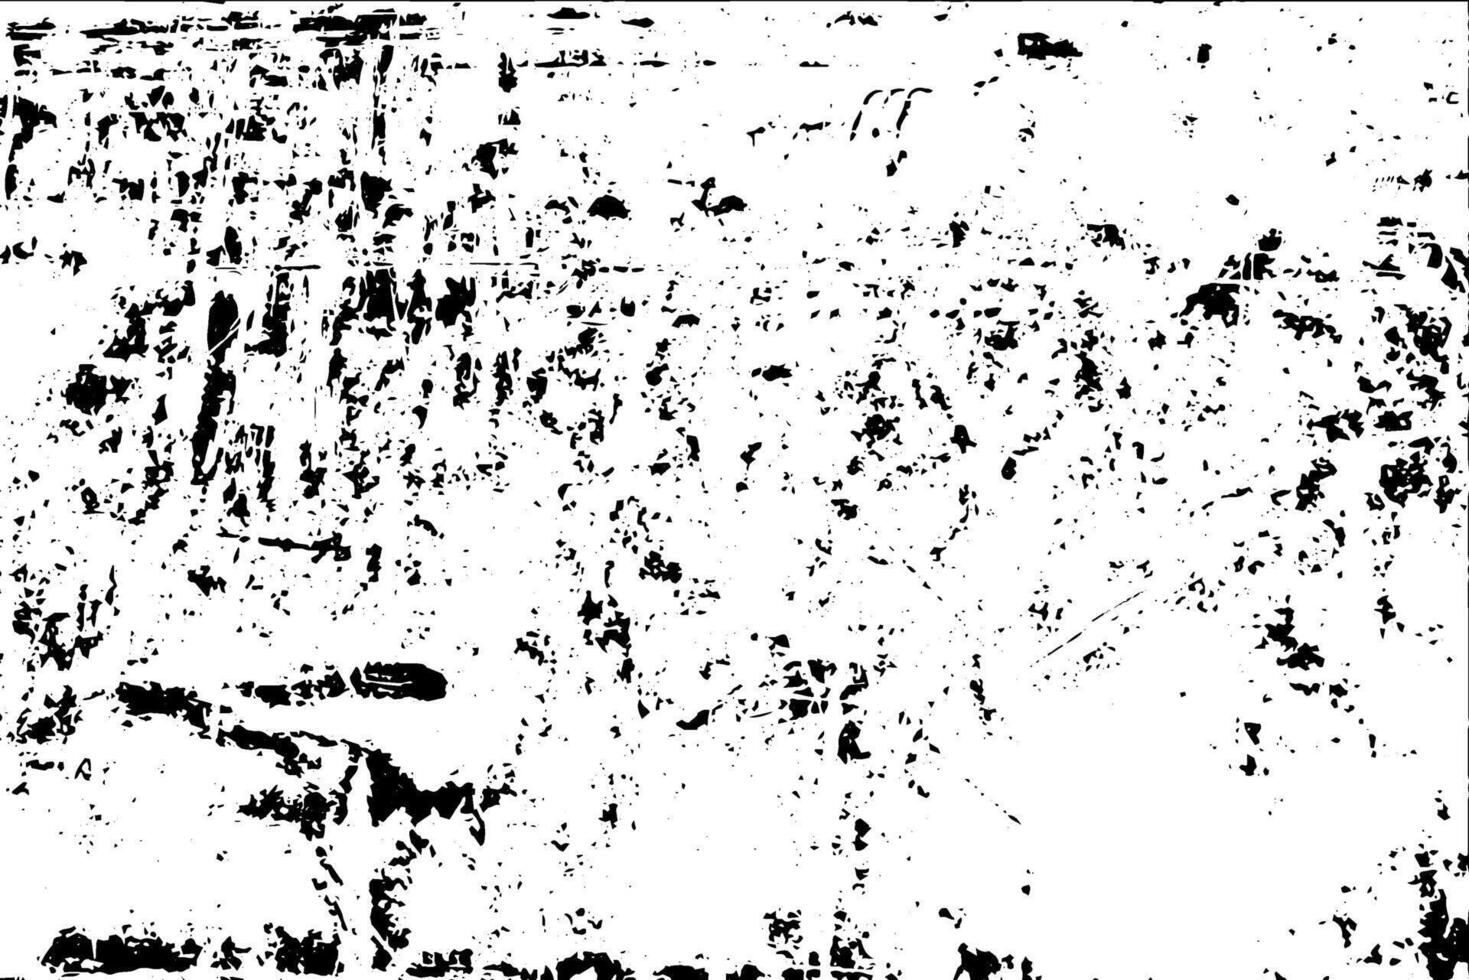 Rustic grunge vector texture with grain and stains. Abstract noise background. Weathered surface.